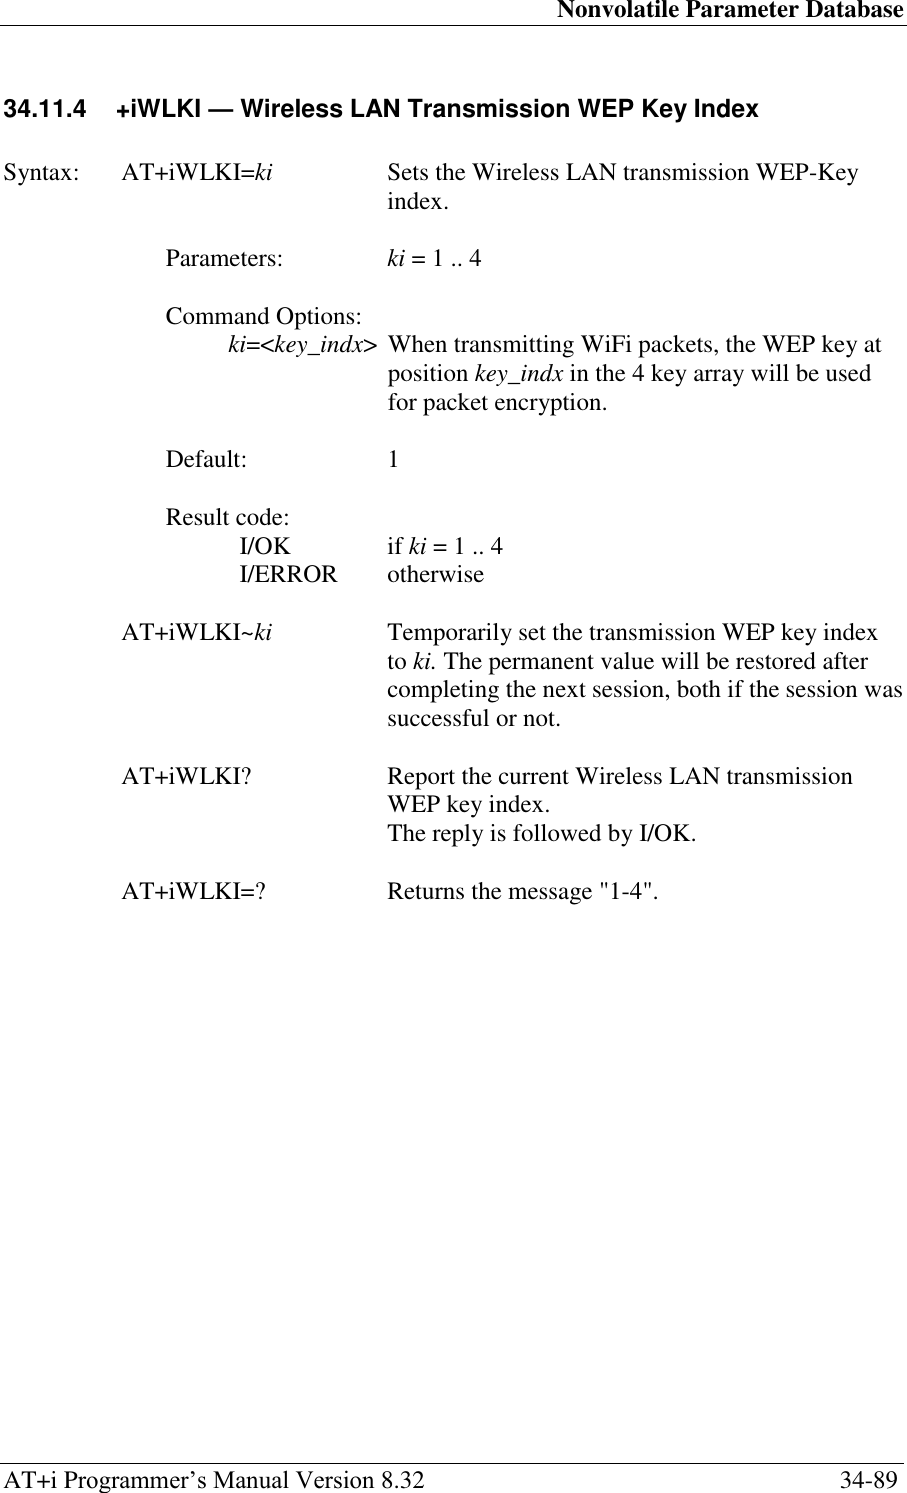 Nonvolatile Parameter Database AT+i Programmer‘s Manual Version 8.32  34-89 34.11.4  +iWLKI — Wireless LAN Transmission WEP Key Index   Syntax:  AT+iWLKI=ki  Sets the Wireless LAN transmission WEP-Key index.  Parameters:  ki = 1 .. 4  Command Options: ki=&lt;key_indx&gt;  When transmitting WiFi packets, the WEP key at position key_indx in the 4 key array will be used for packet encryption.  Default:  1  Result code: I/OK  if ki = 1 .. 4 I/ERROR   otherwise  AT+iWLKI~ki  Temporarily set the transmission WEP key index to ki. The permanent value will be restored after completing the next session, both if the session was successful or not.  AT+iWLKI?  Report the current Wireless LAN transmission WEP key index.   The reply is followed by I/OK.  AT+iWLKI=?  Returns the message &quot;1-4&quot;. 